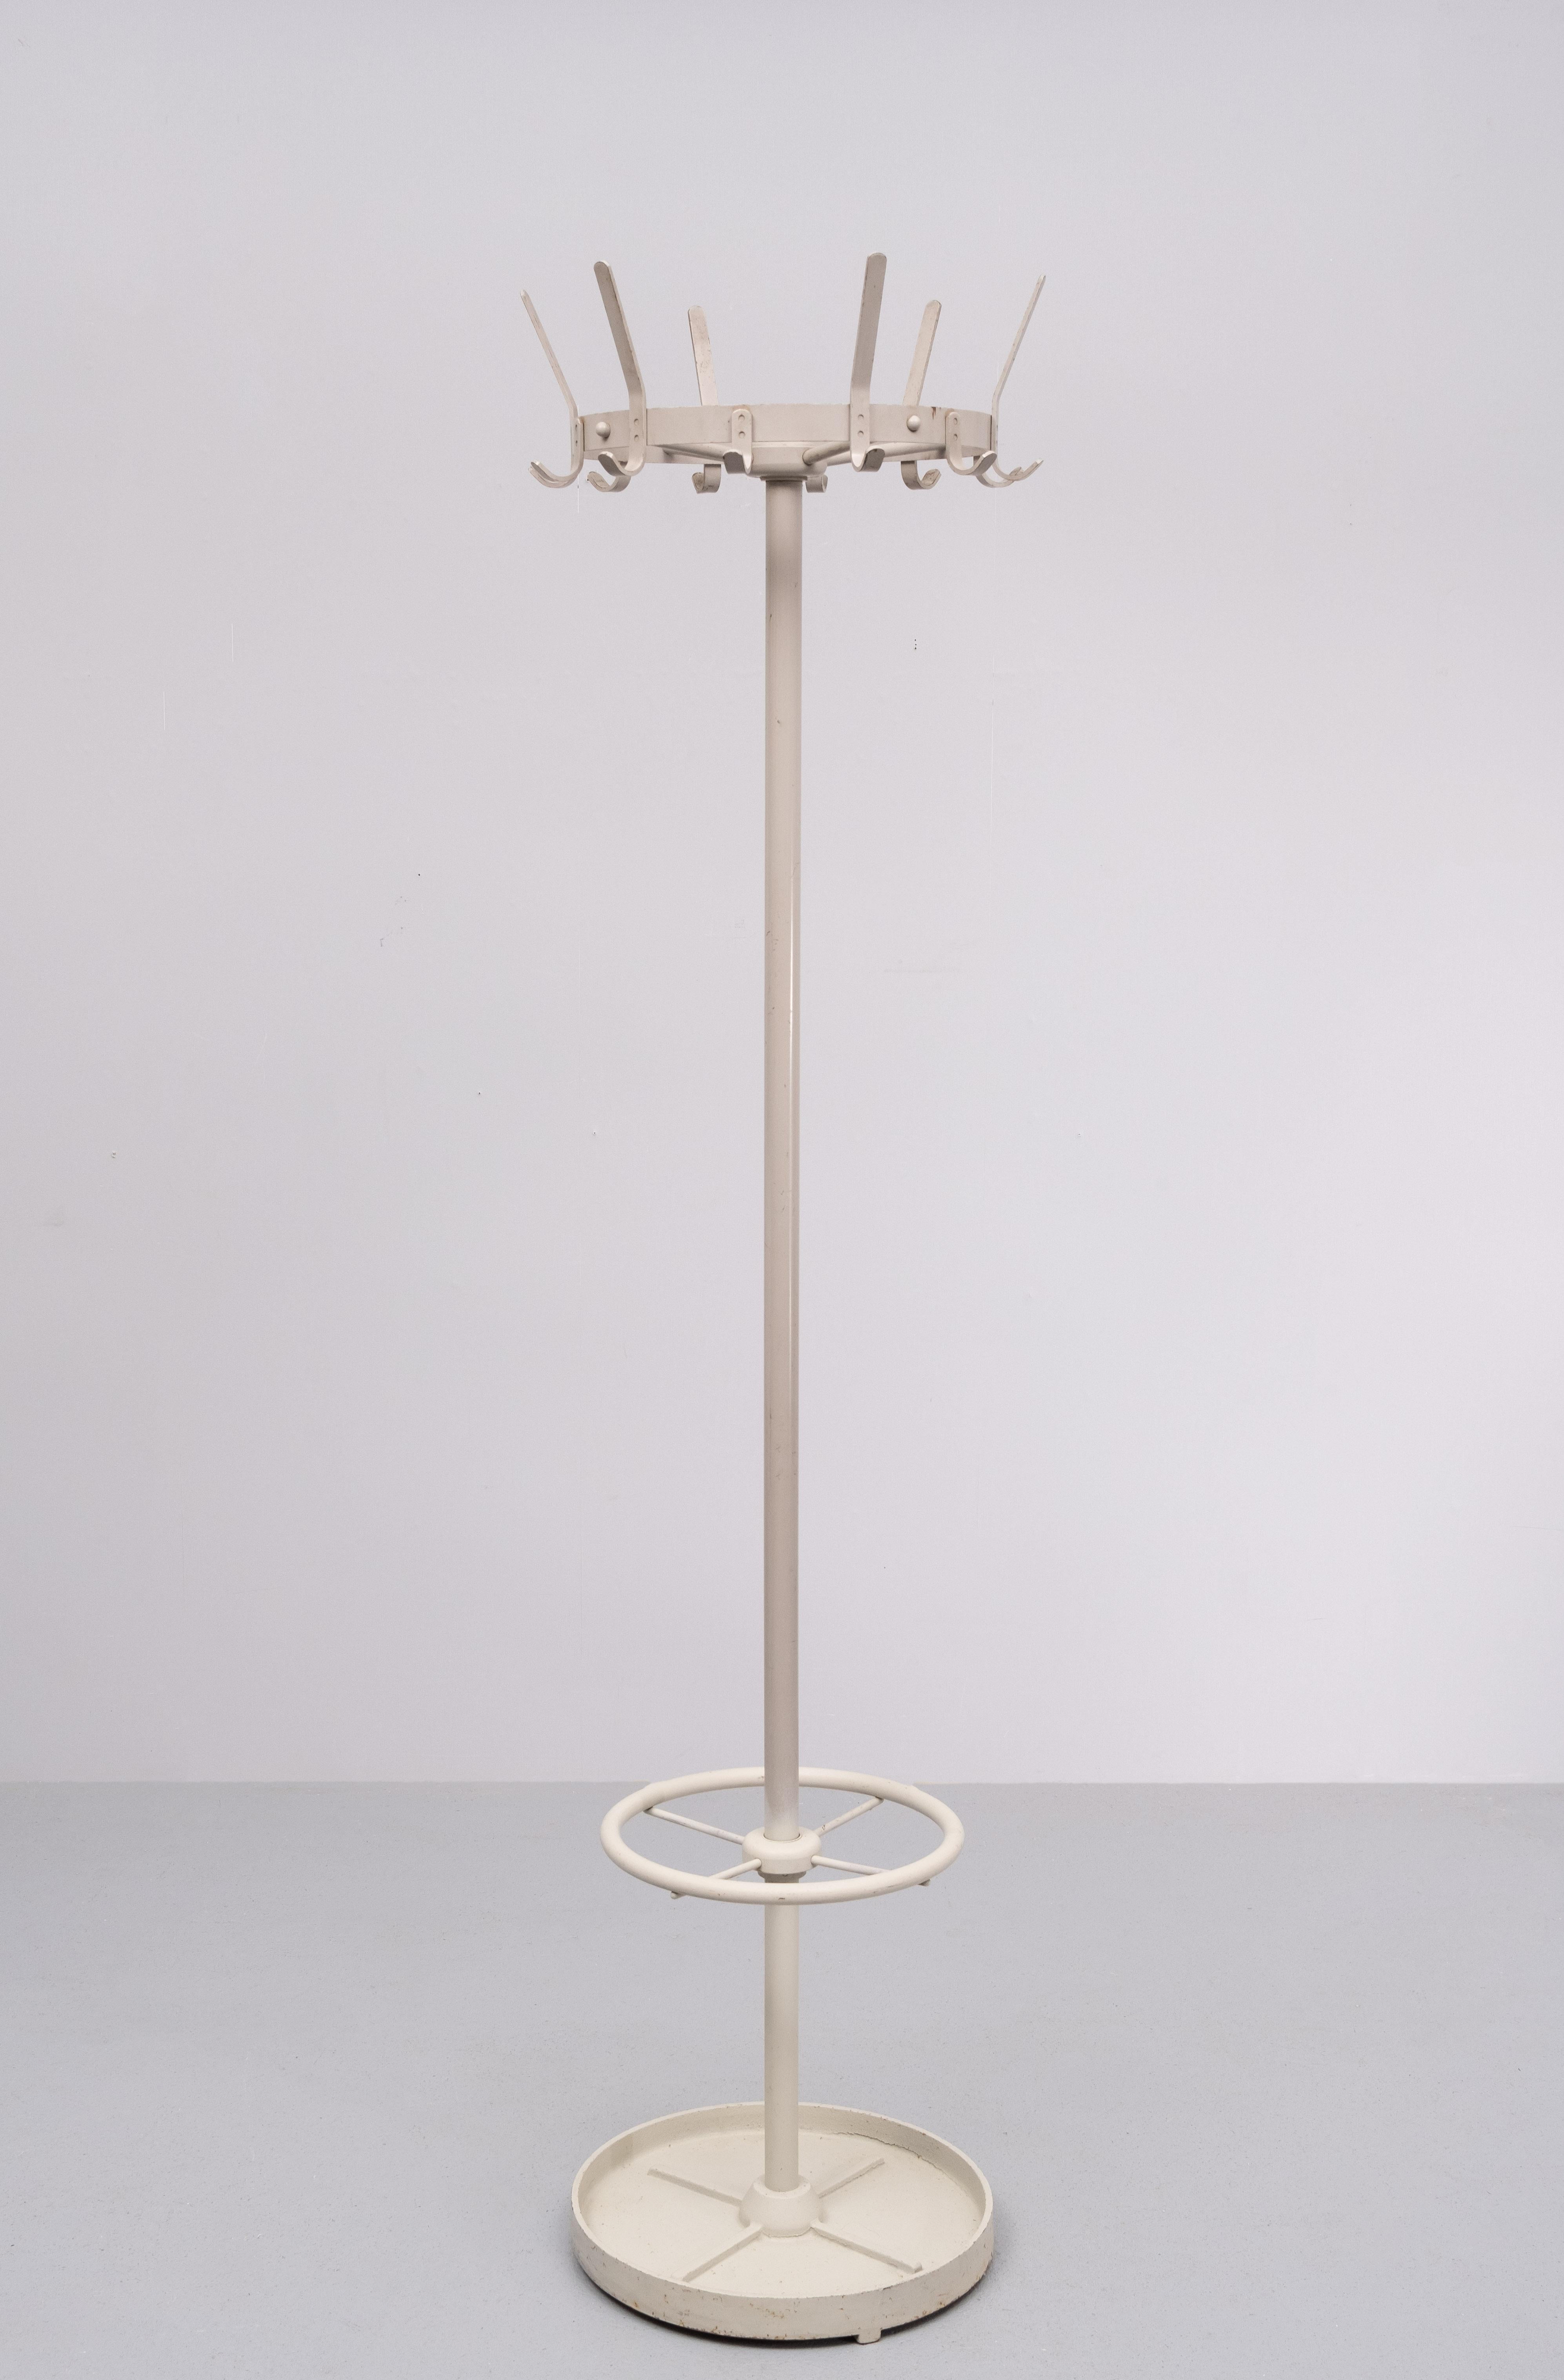 Iron Industrial Coat Stand by Friso Kramer for Ahrend de Cirkel, 1960s For Sale